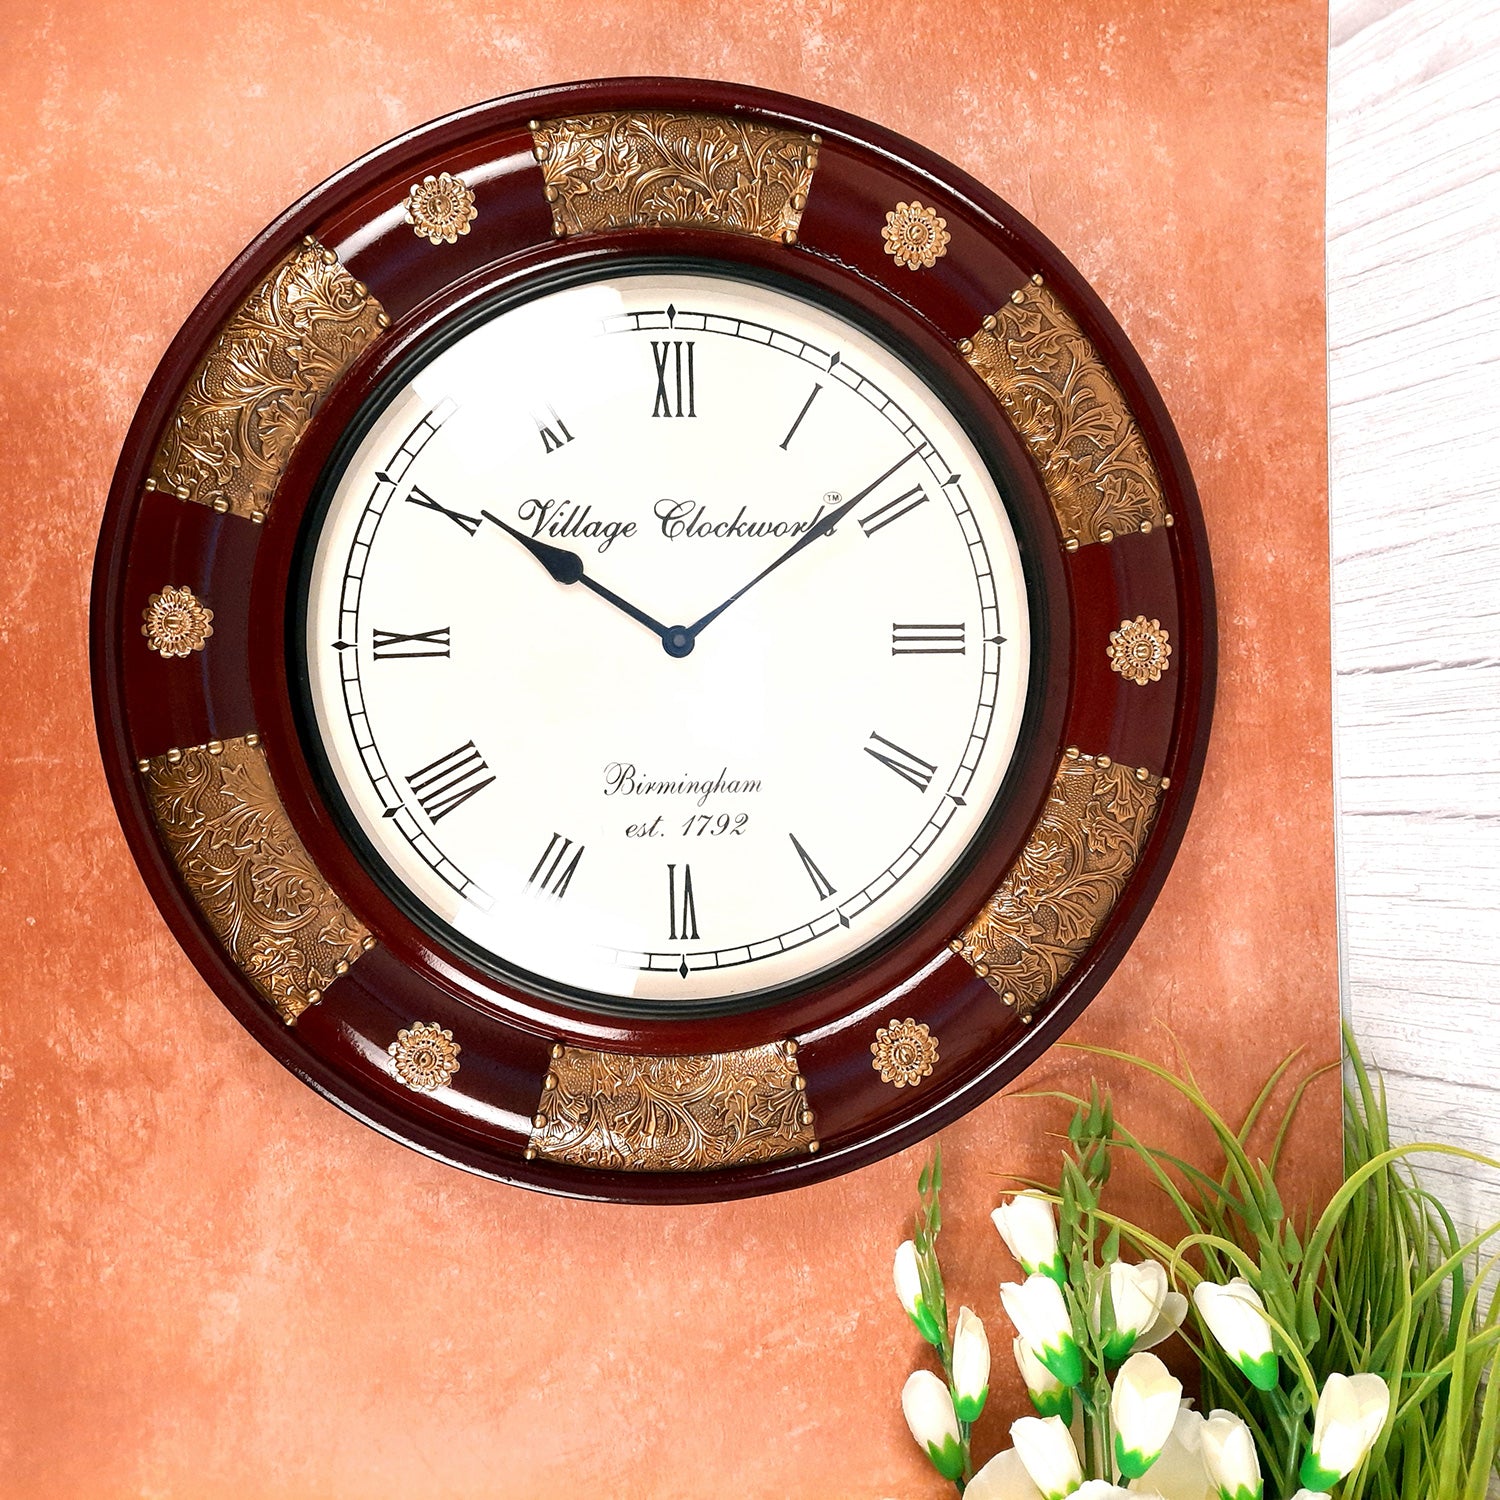 Wall Clock Wooden | Wall Mount Analog Clock With Premium Wood Finish & Brass Work - For Home, Living Room, Bedroom, Hall Decor | Wedding & Housewarming Gift - 18 Inch - Apkamart